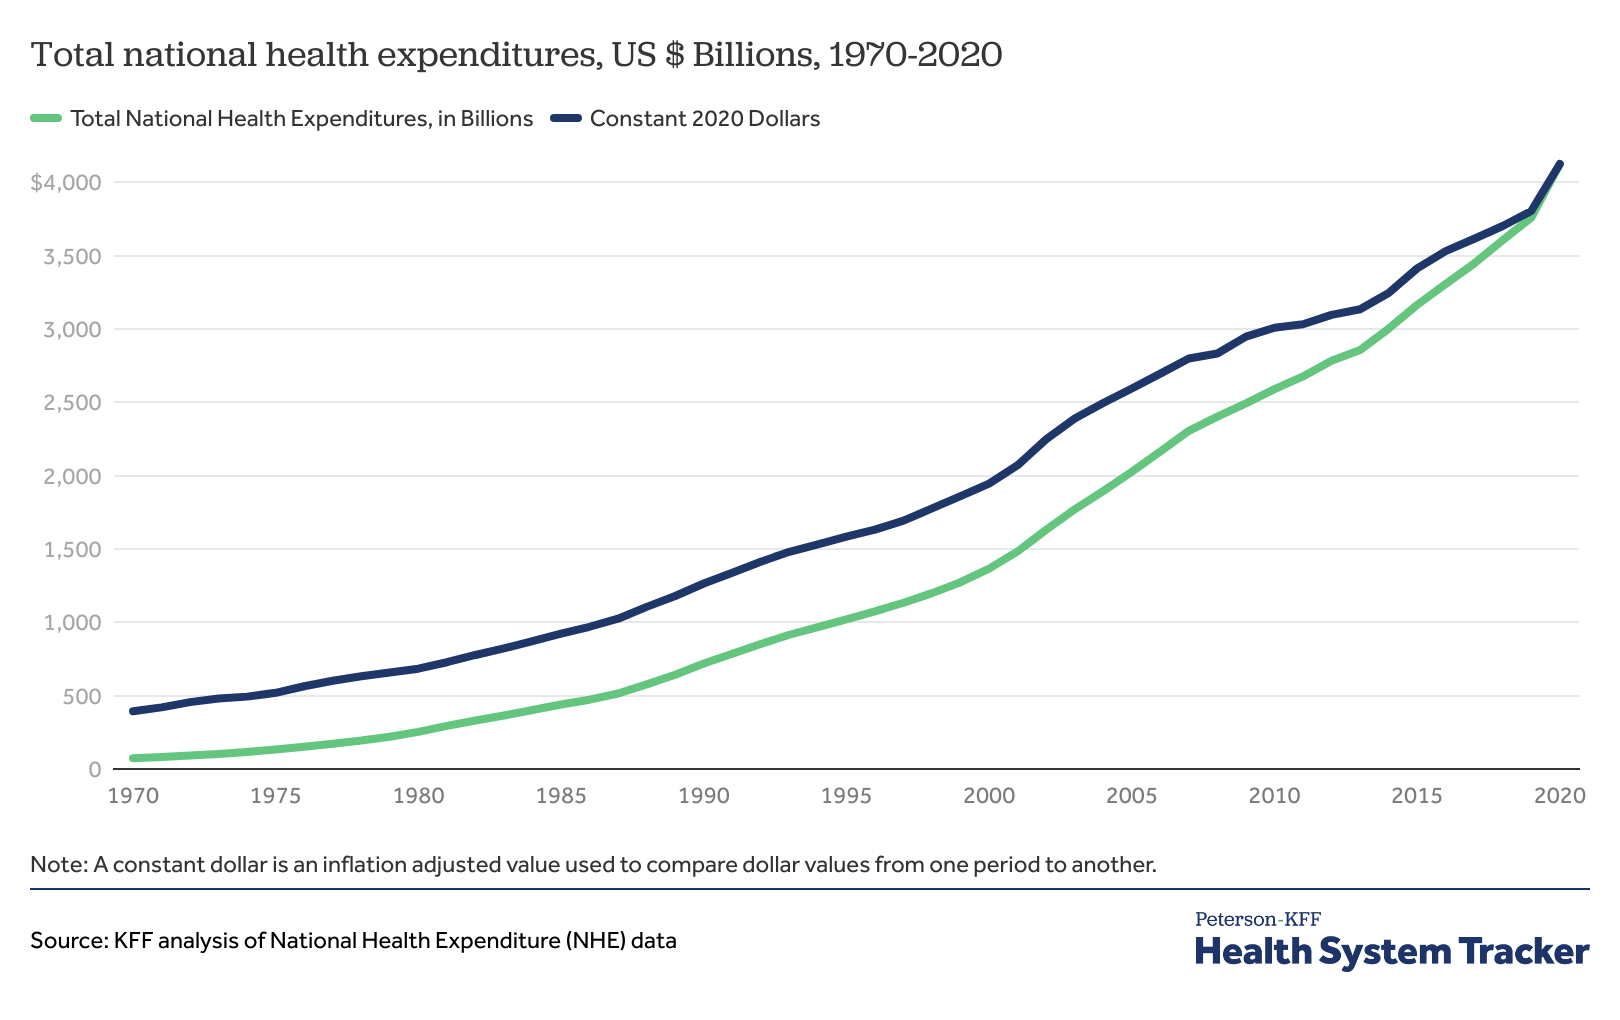 How has health spending changed over time? KFF